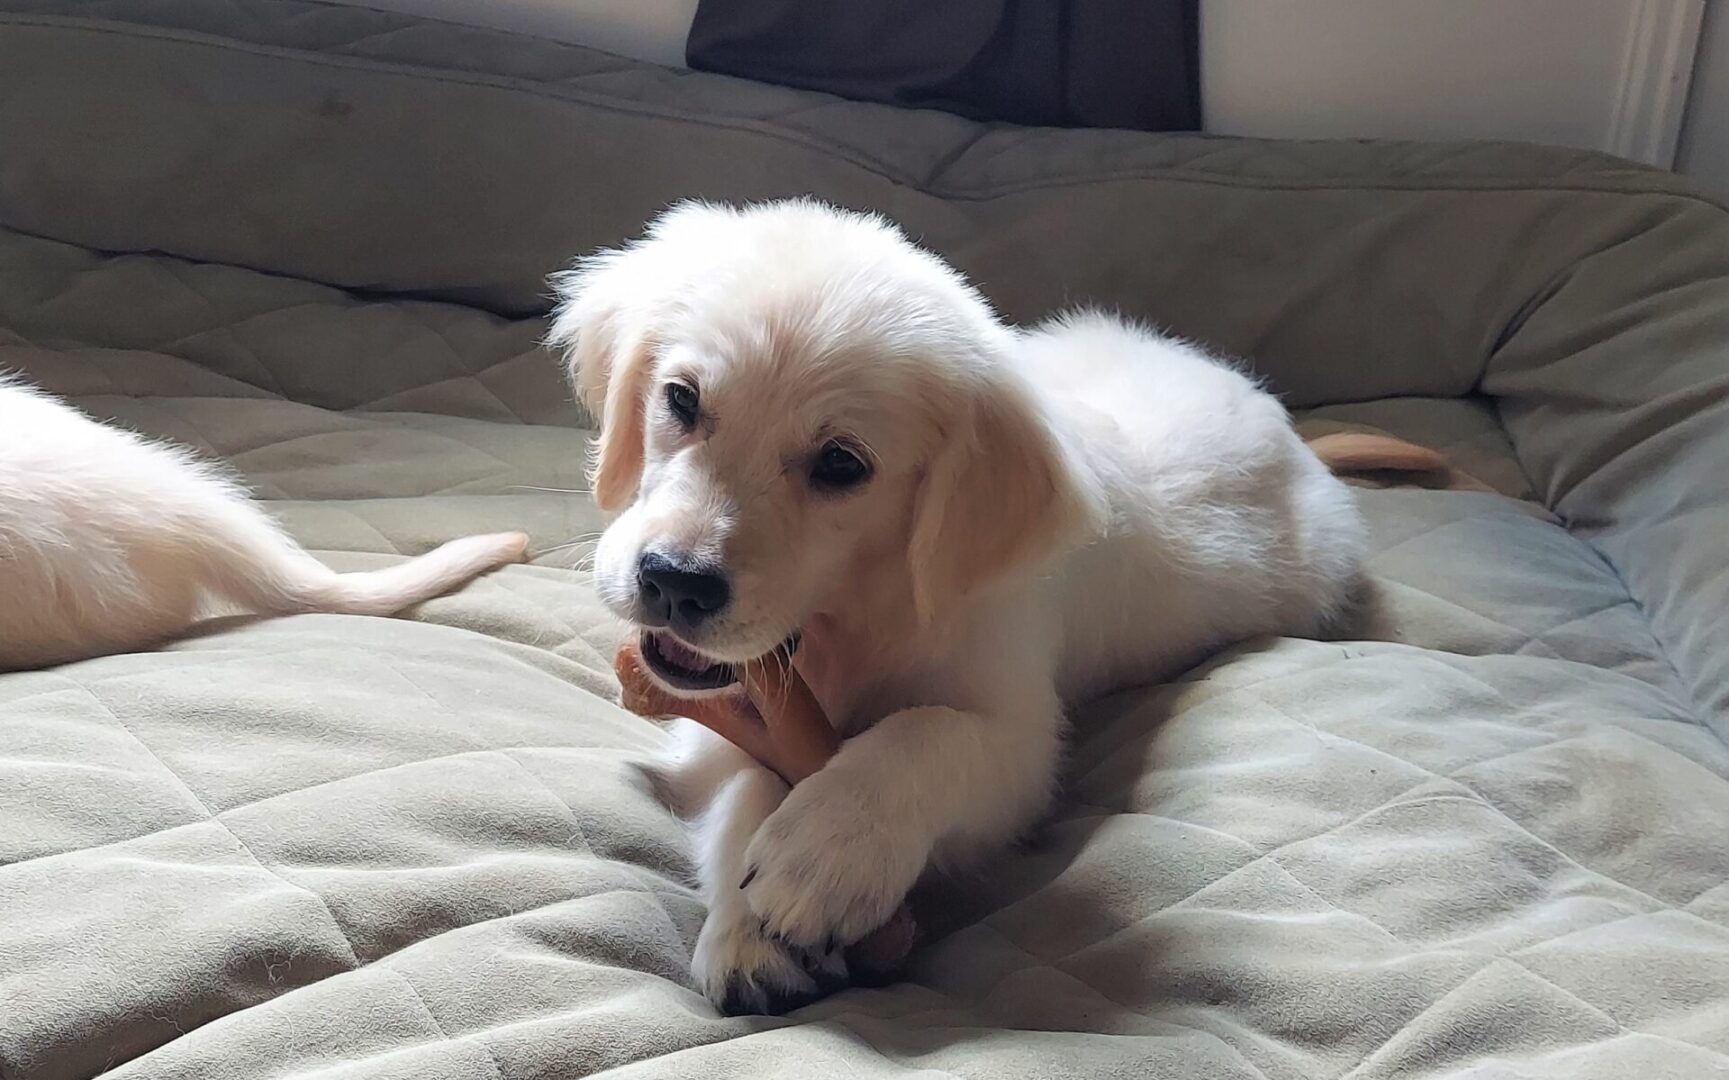 Golden retriever puppy lying on the bed while chewing a treat.